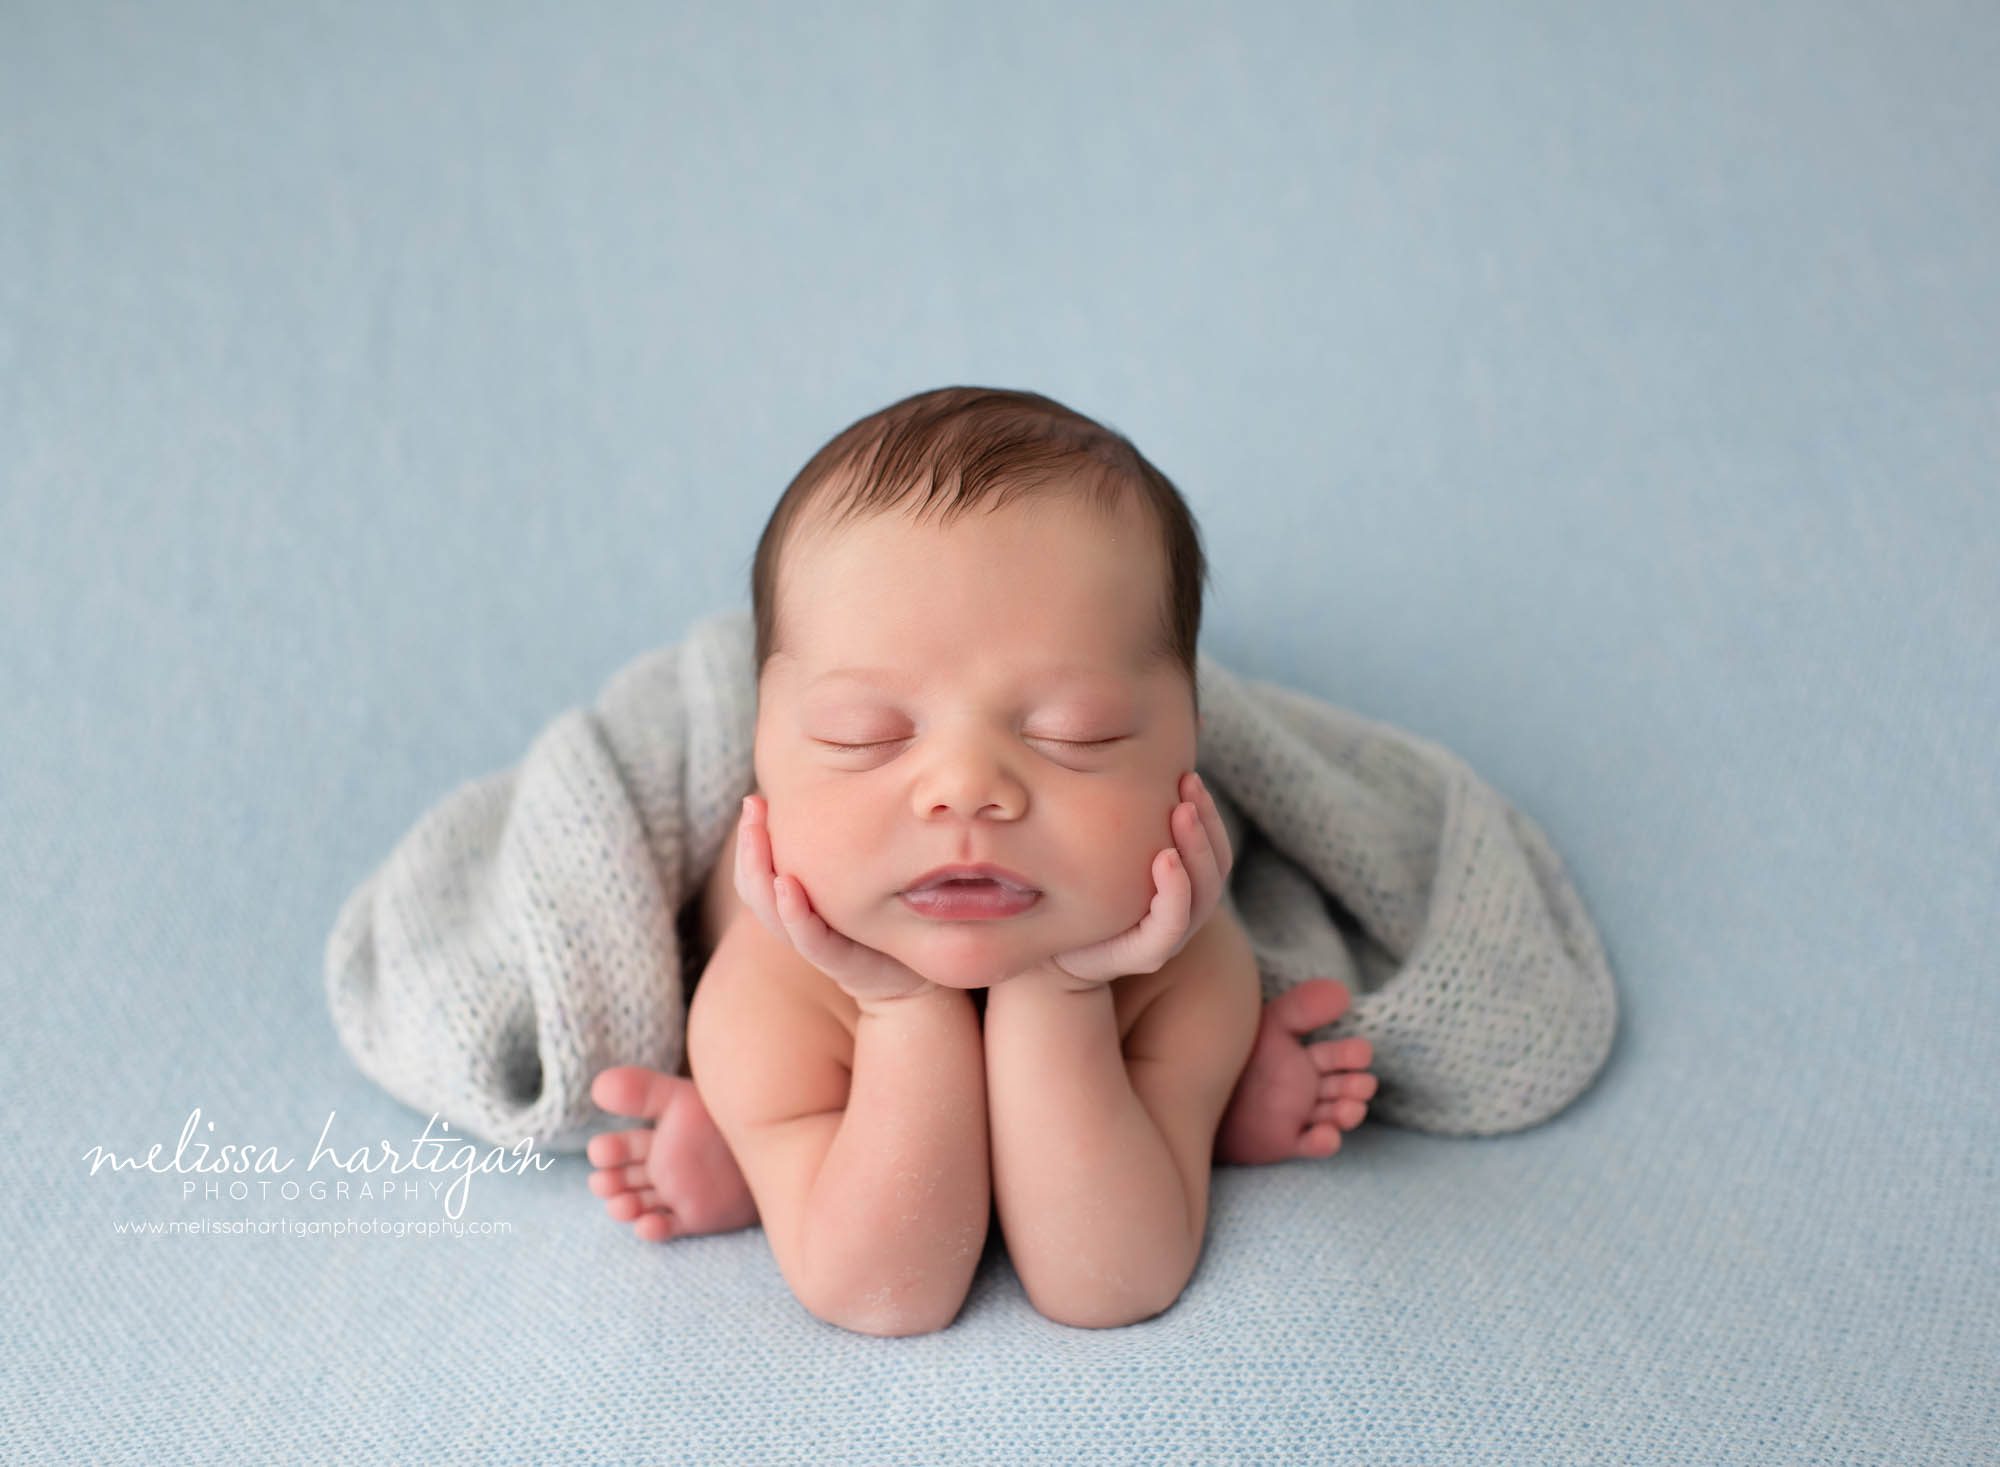 Baby boy posed on light blue backdrop in froggy pose with knitted layering texture newborn Photographer Storrs CT